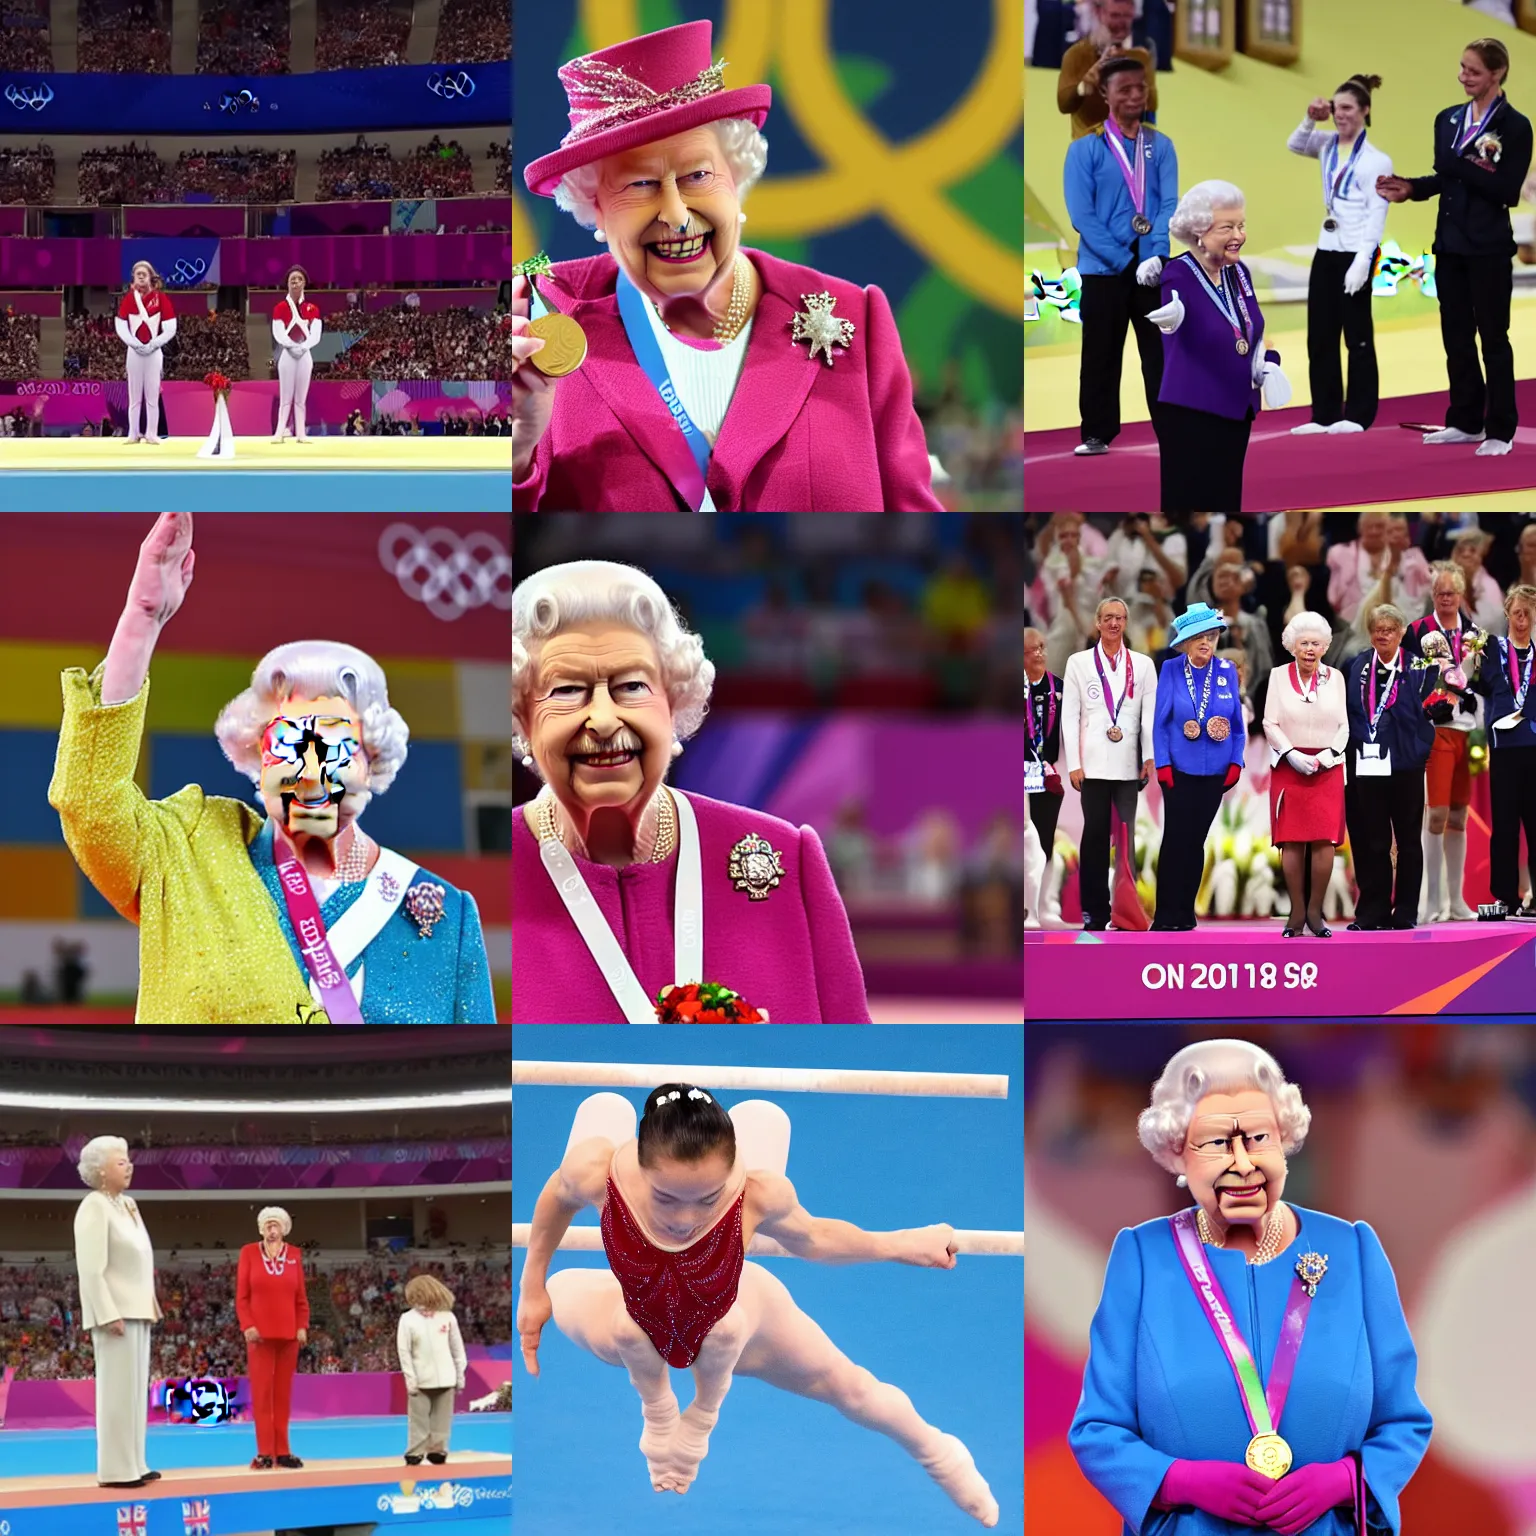 Prompt: Queen Elizabeth wins the gymnastics gold medal at the Olympics, live footage, 8k resolution HDR,